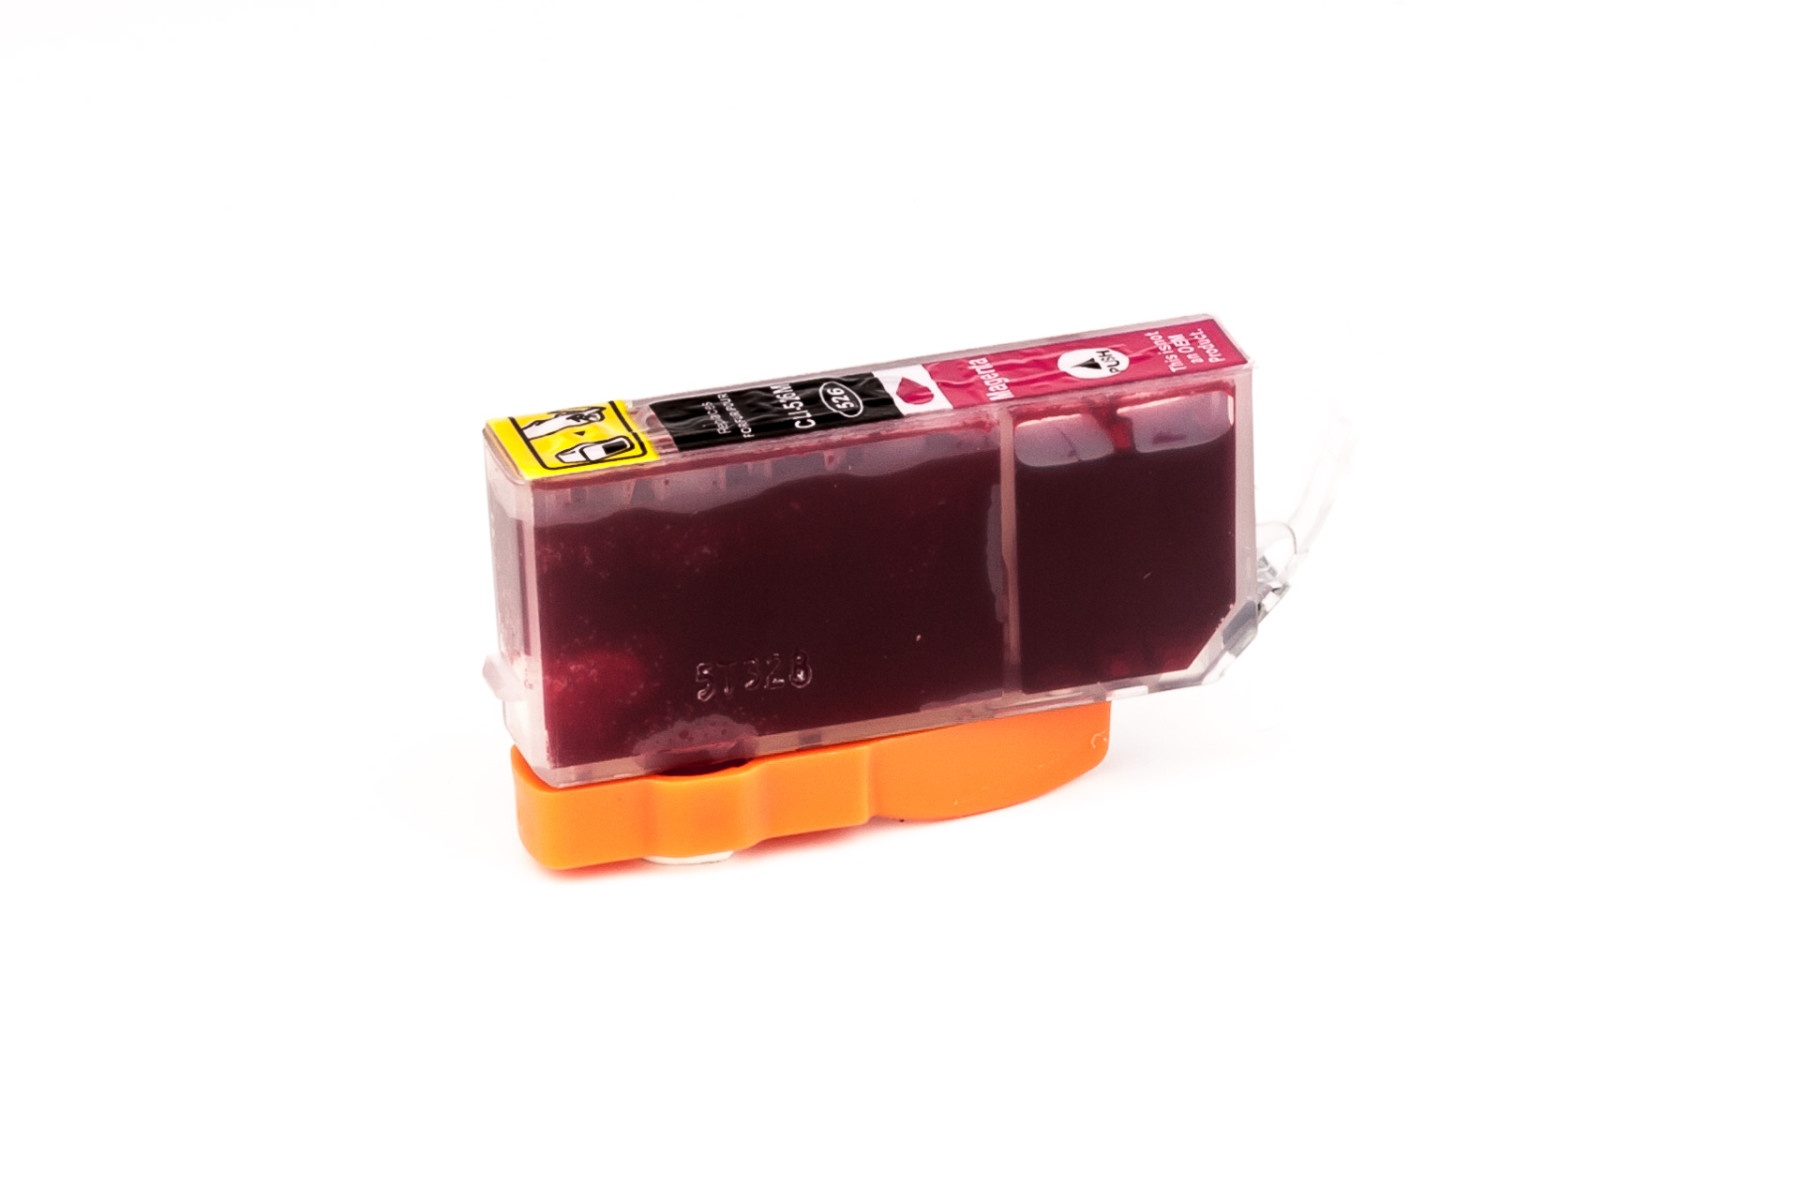 Set consisting of Ink cartridge (alternative) compatible with Canon CLI 526 black with Chip  //  CLI526BK / CLI-526 BK, cyan with Chip  //  CLI526C / CLI-526 C, magenta with Chip  //  CLI526M / CLI-526 M, yellow with Chip  //  CLI526Y / CLI-526 Y - Save 6